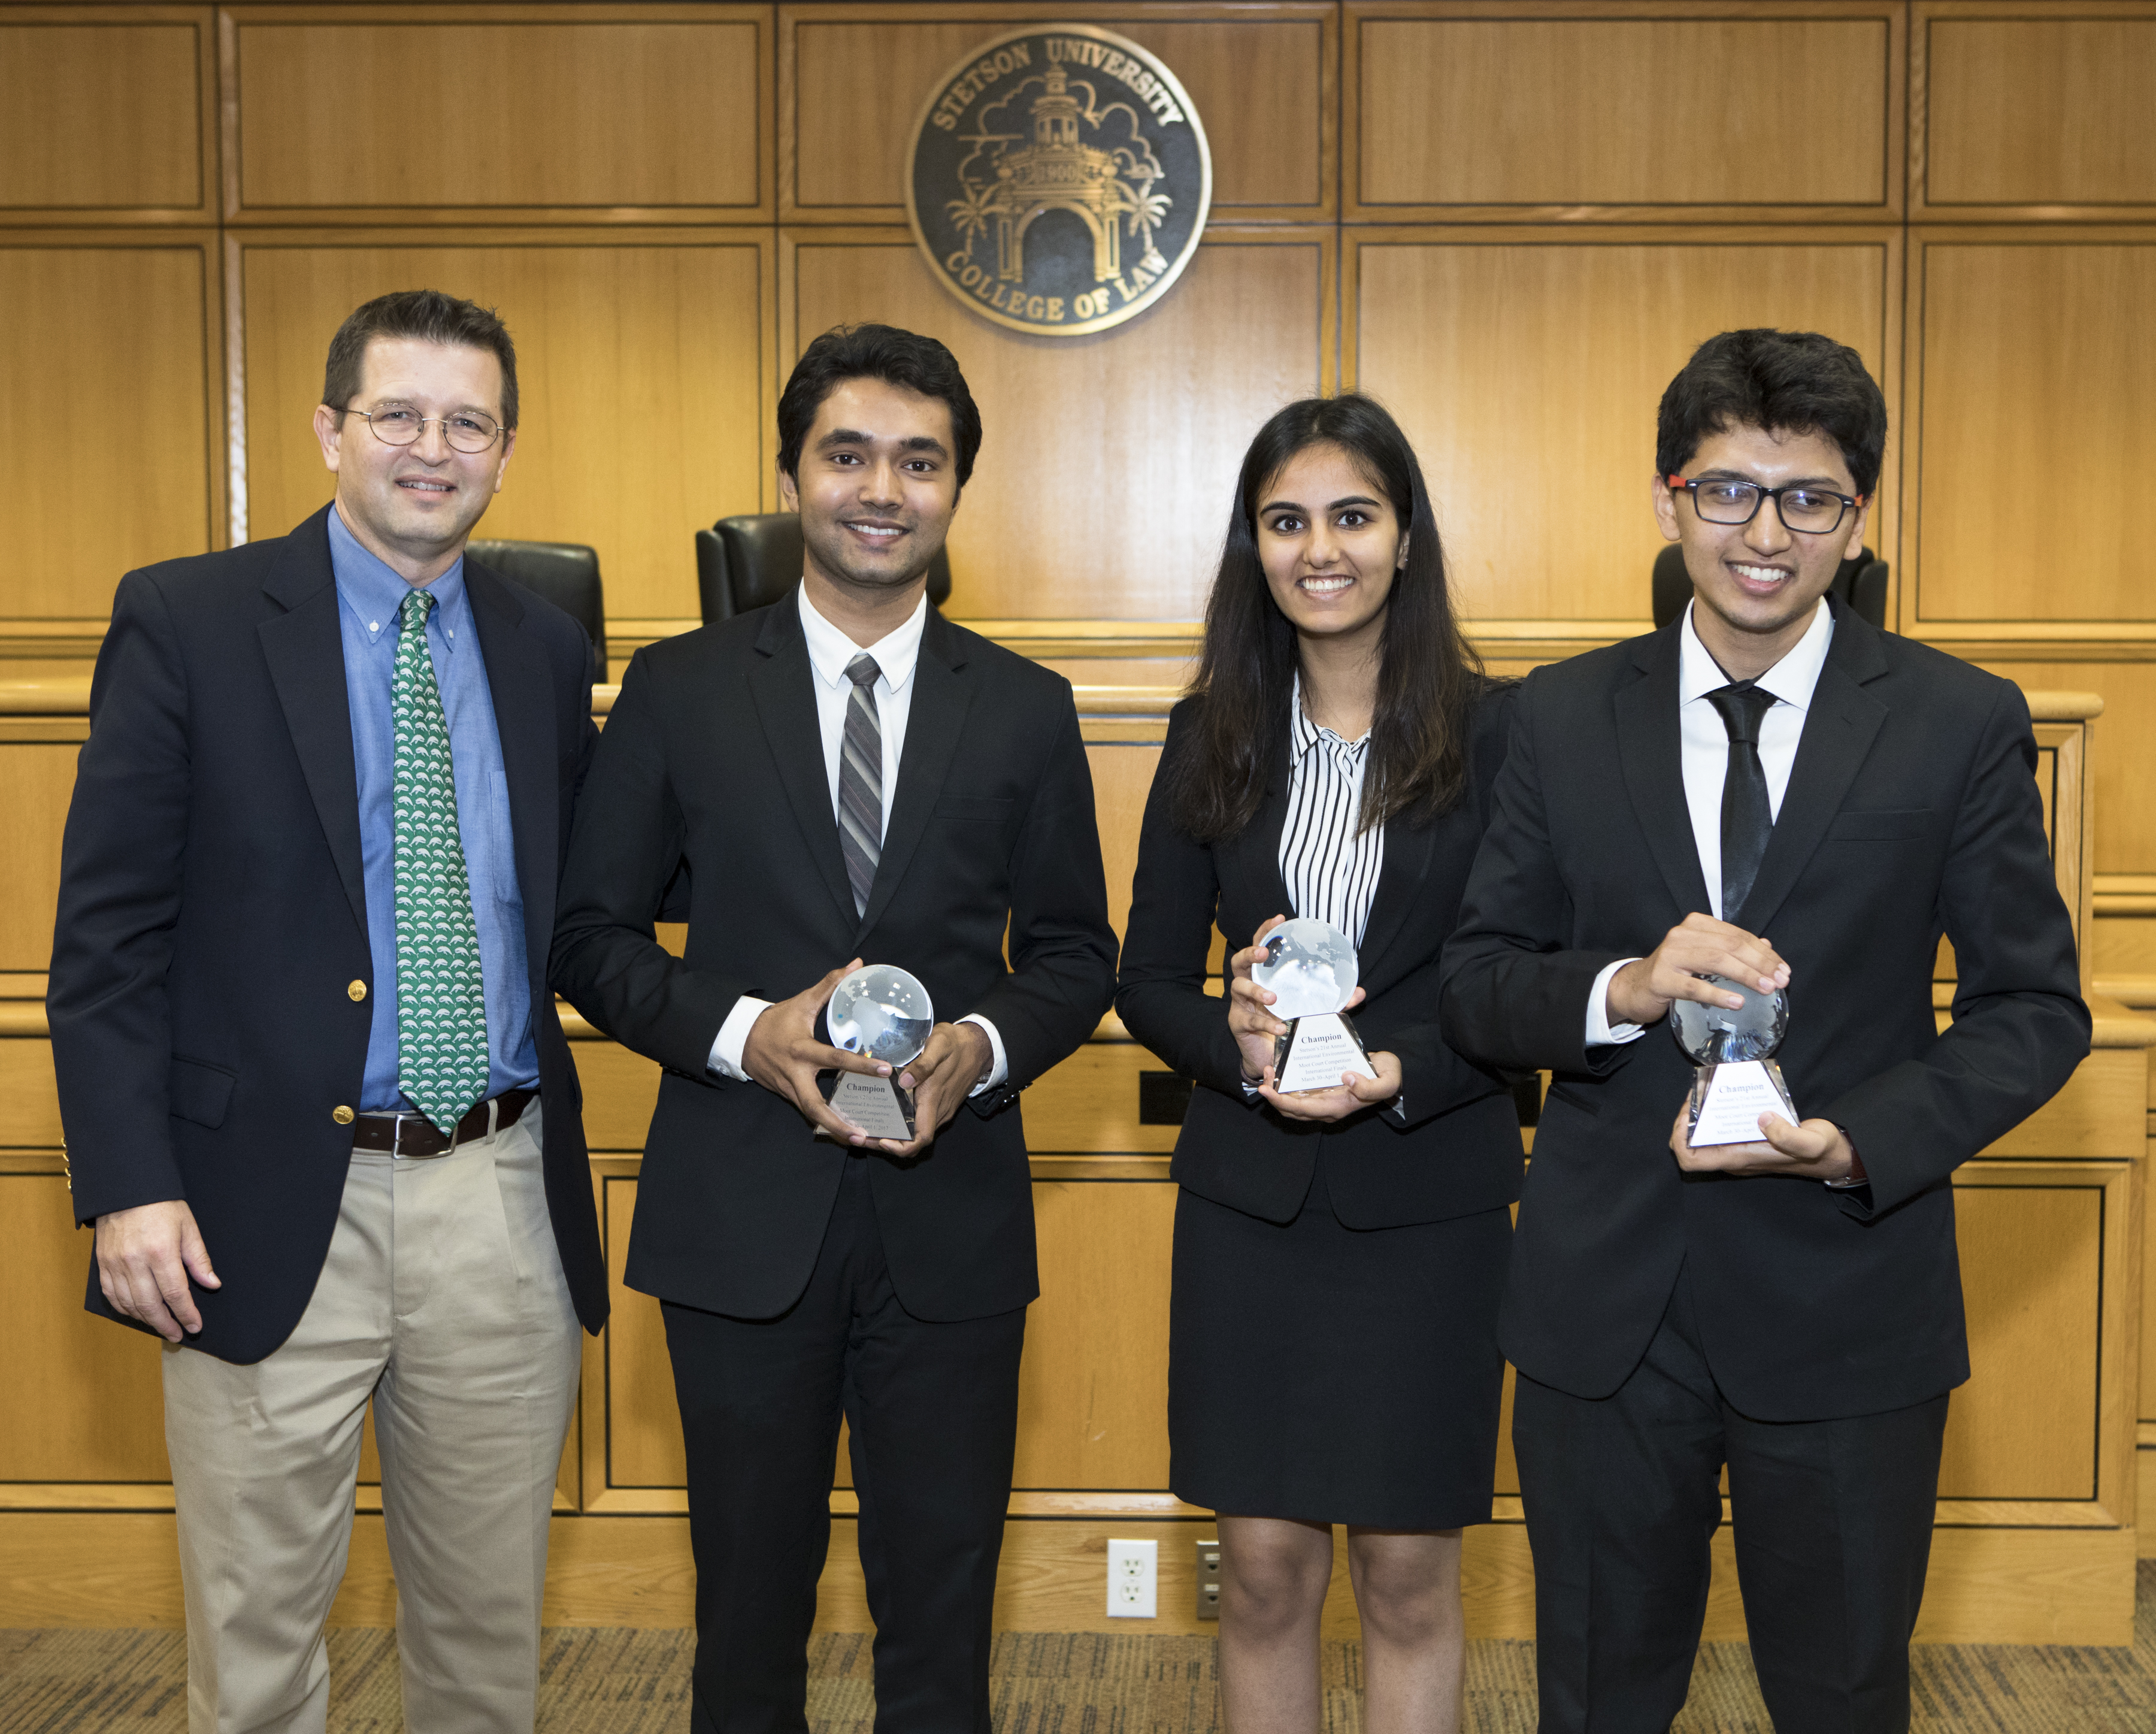 The winning team, from Gujarat National Law University in India.